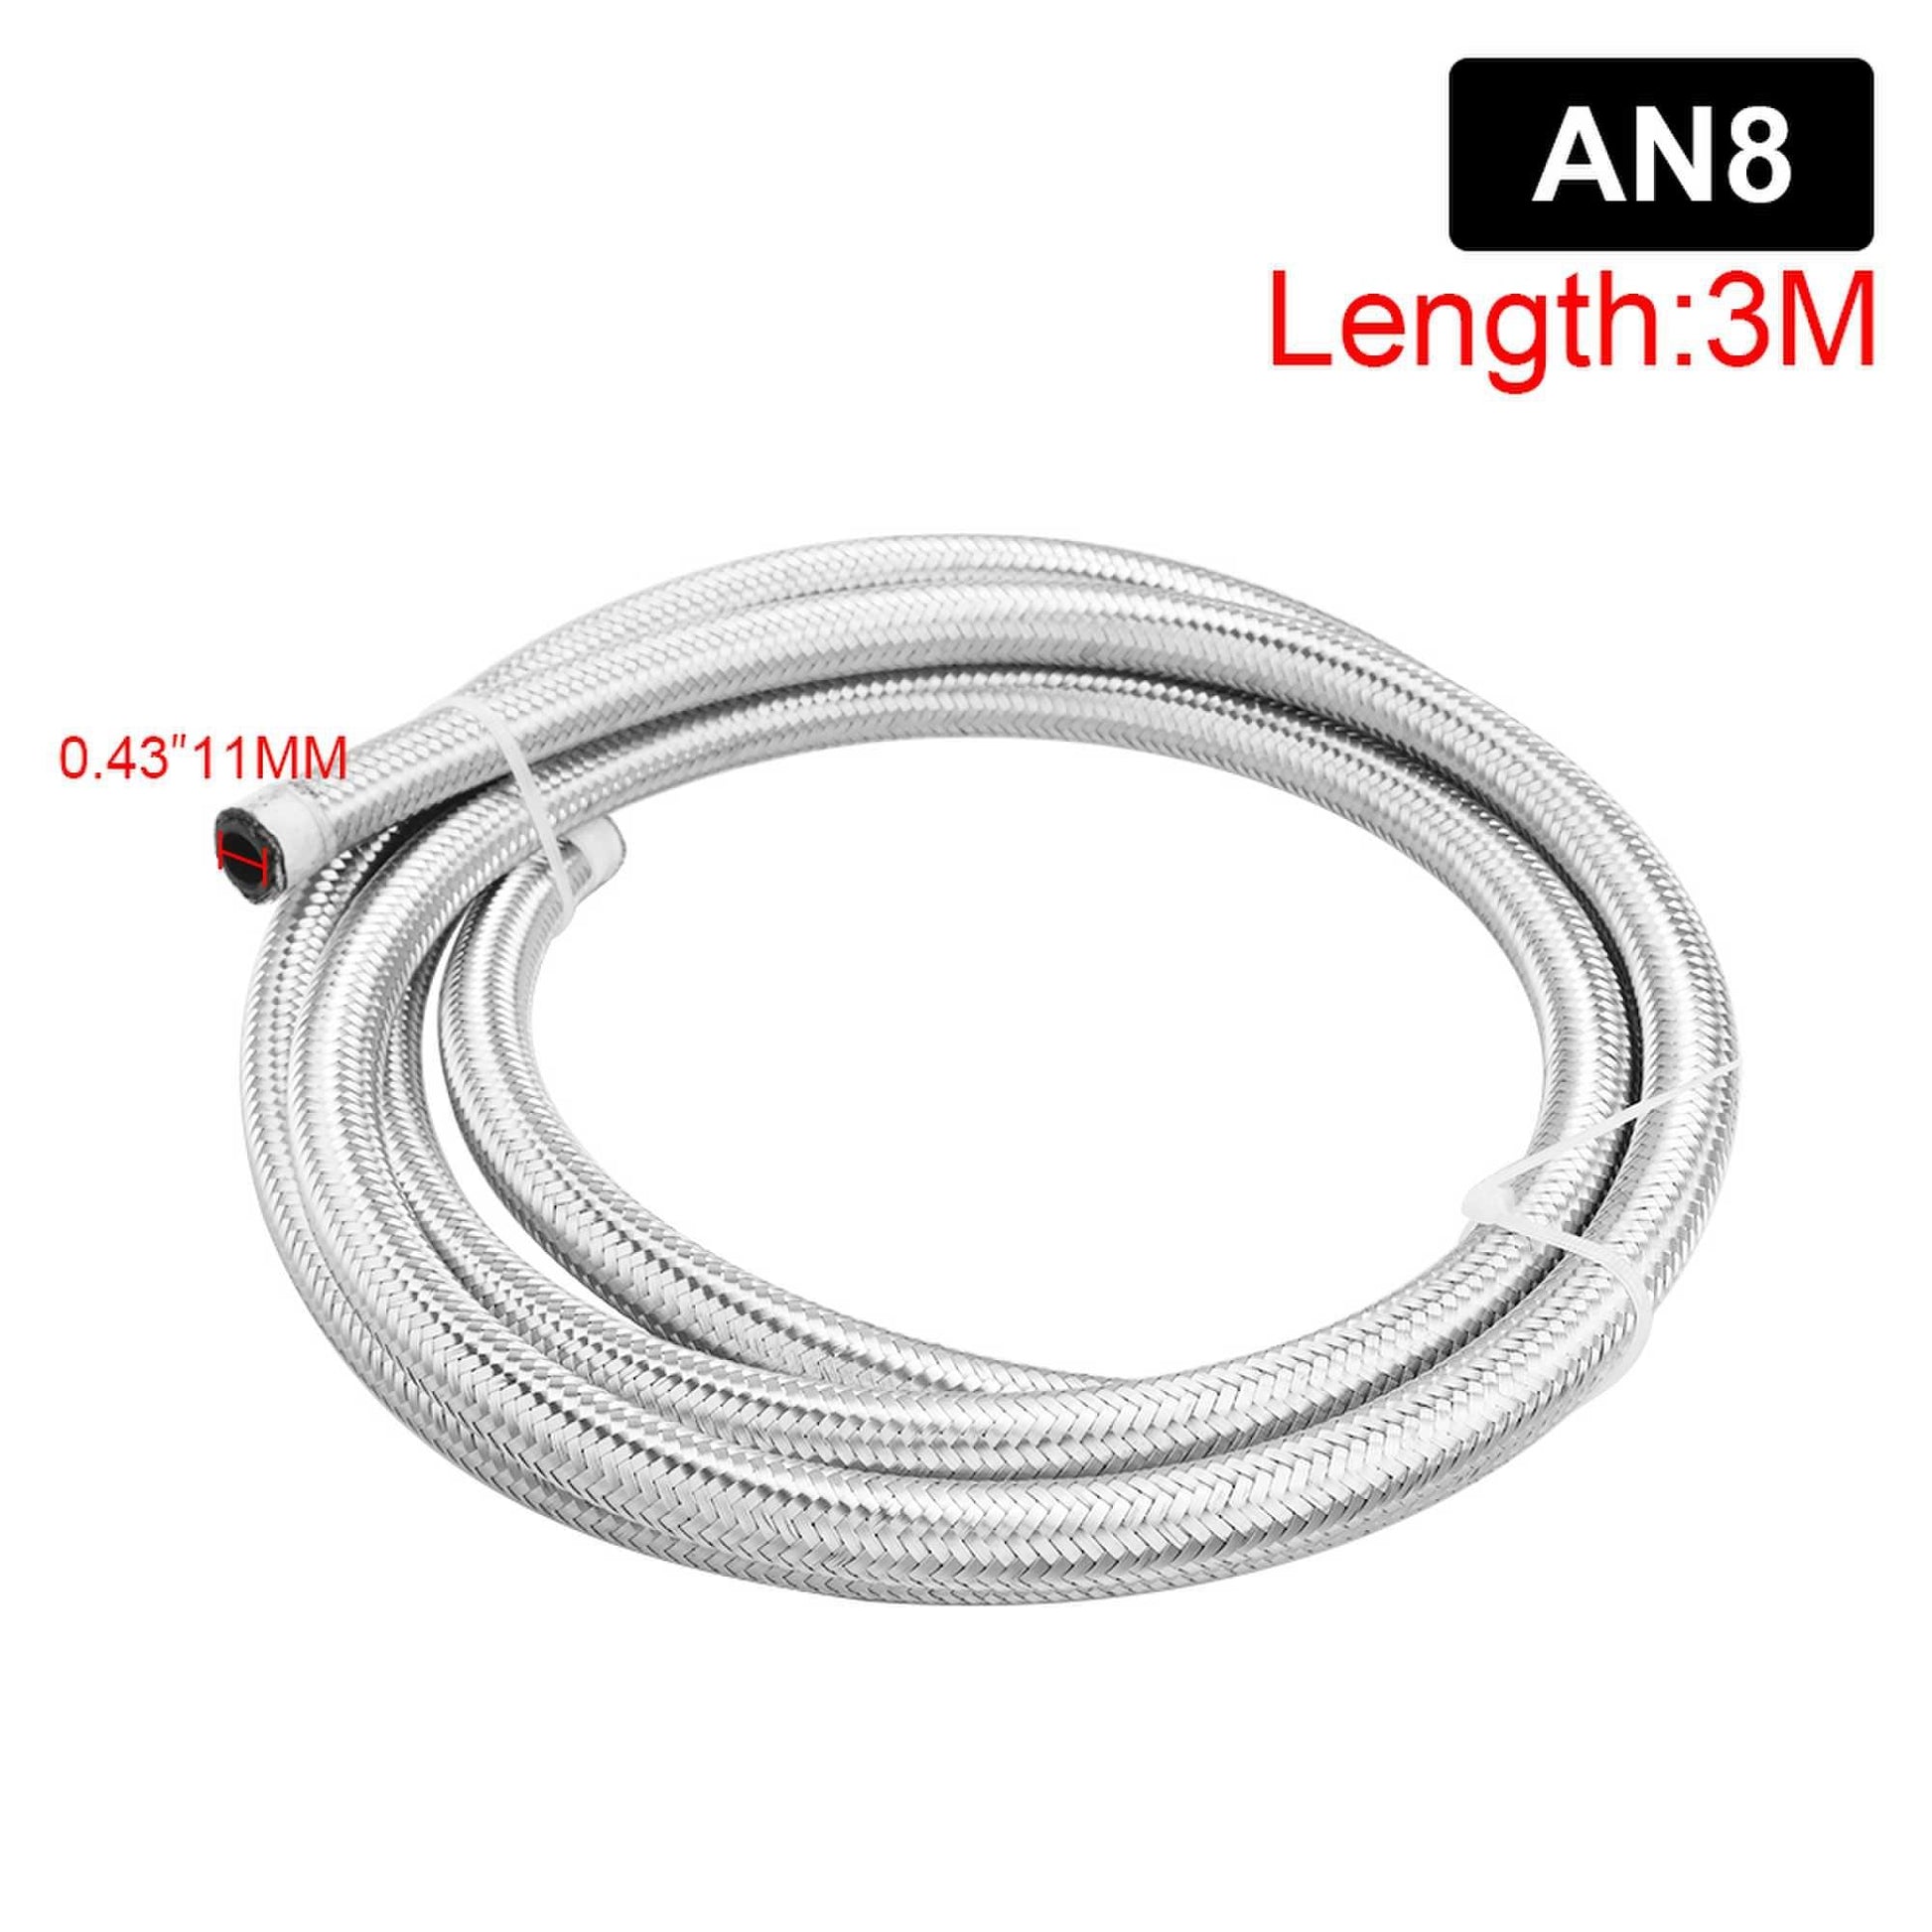 RASTP 3M AN4 - AN10 Oil Line Hose Stainless Steel Braided PTFE Brake Fuel Hose Pipe Oil Cooler Tubing - RASTP